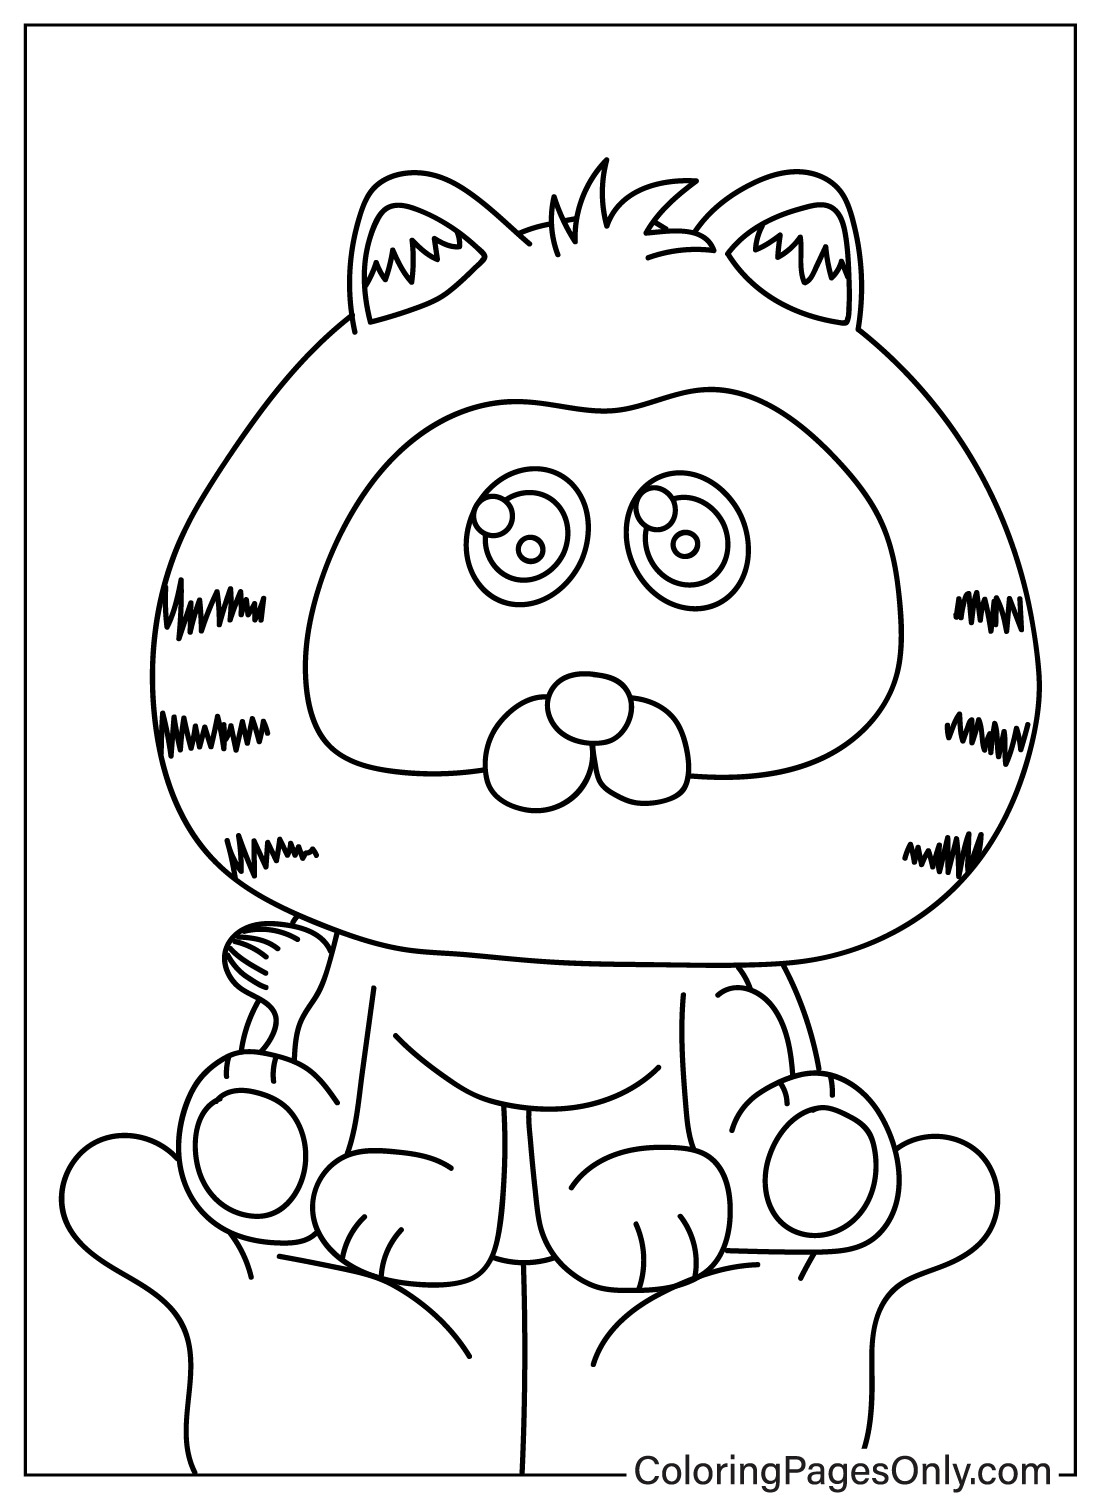 Free Garfield Coloring Page to Print from Garfield